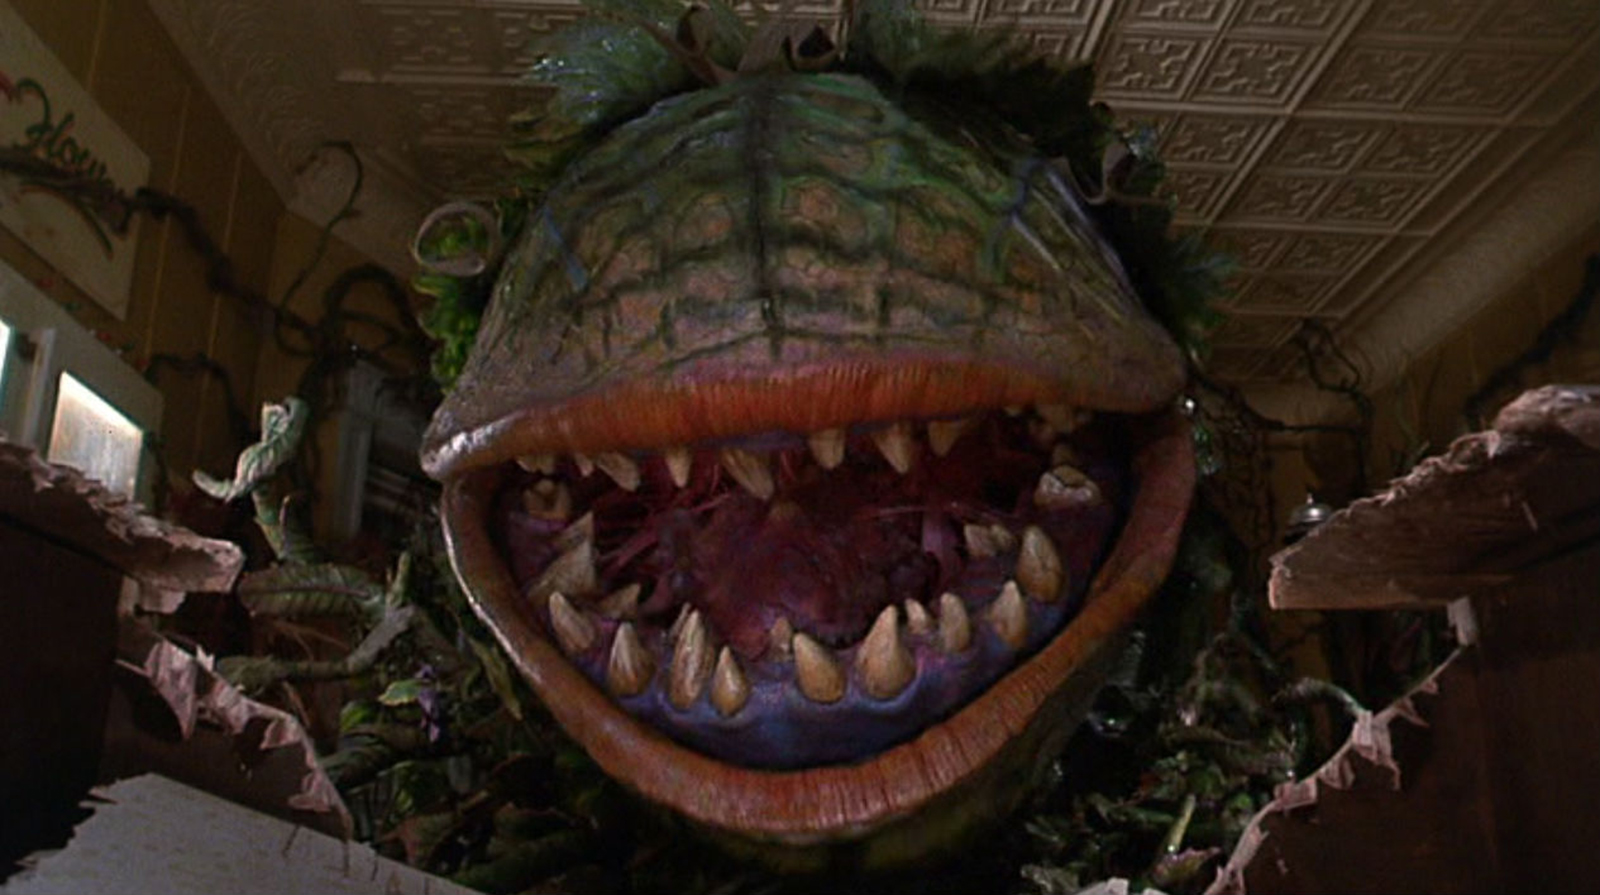 This is a still from The Little Shop of Horrors.